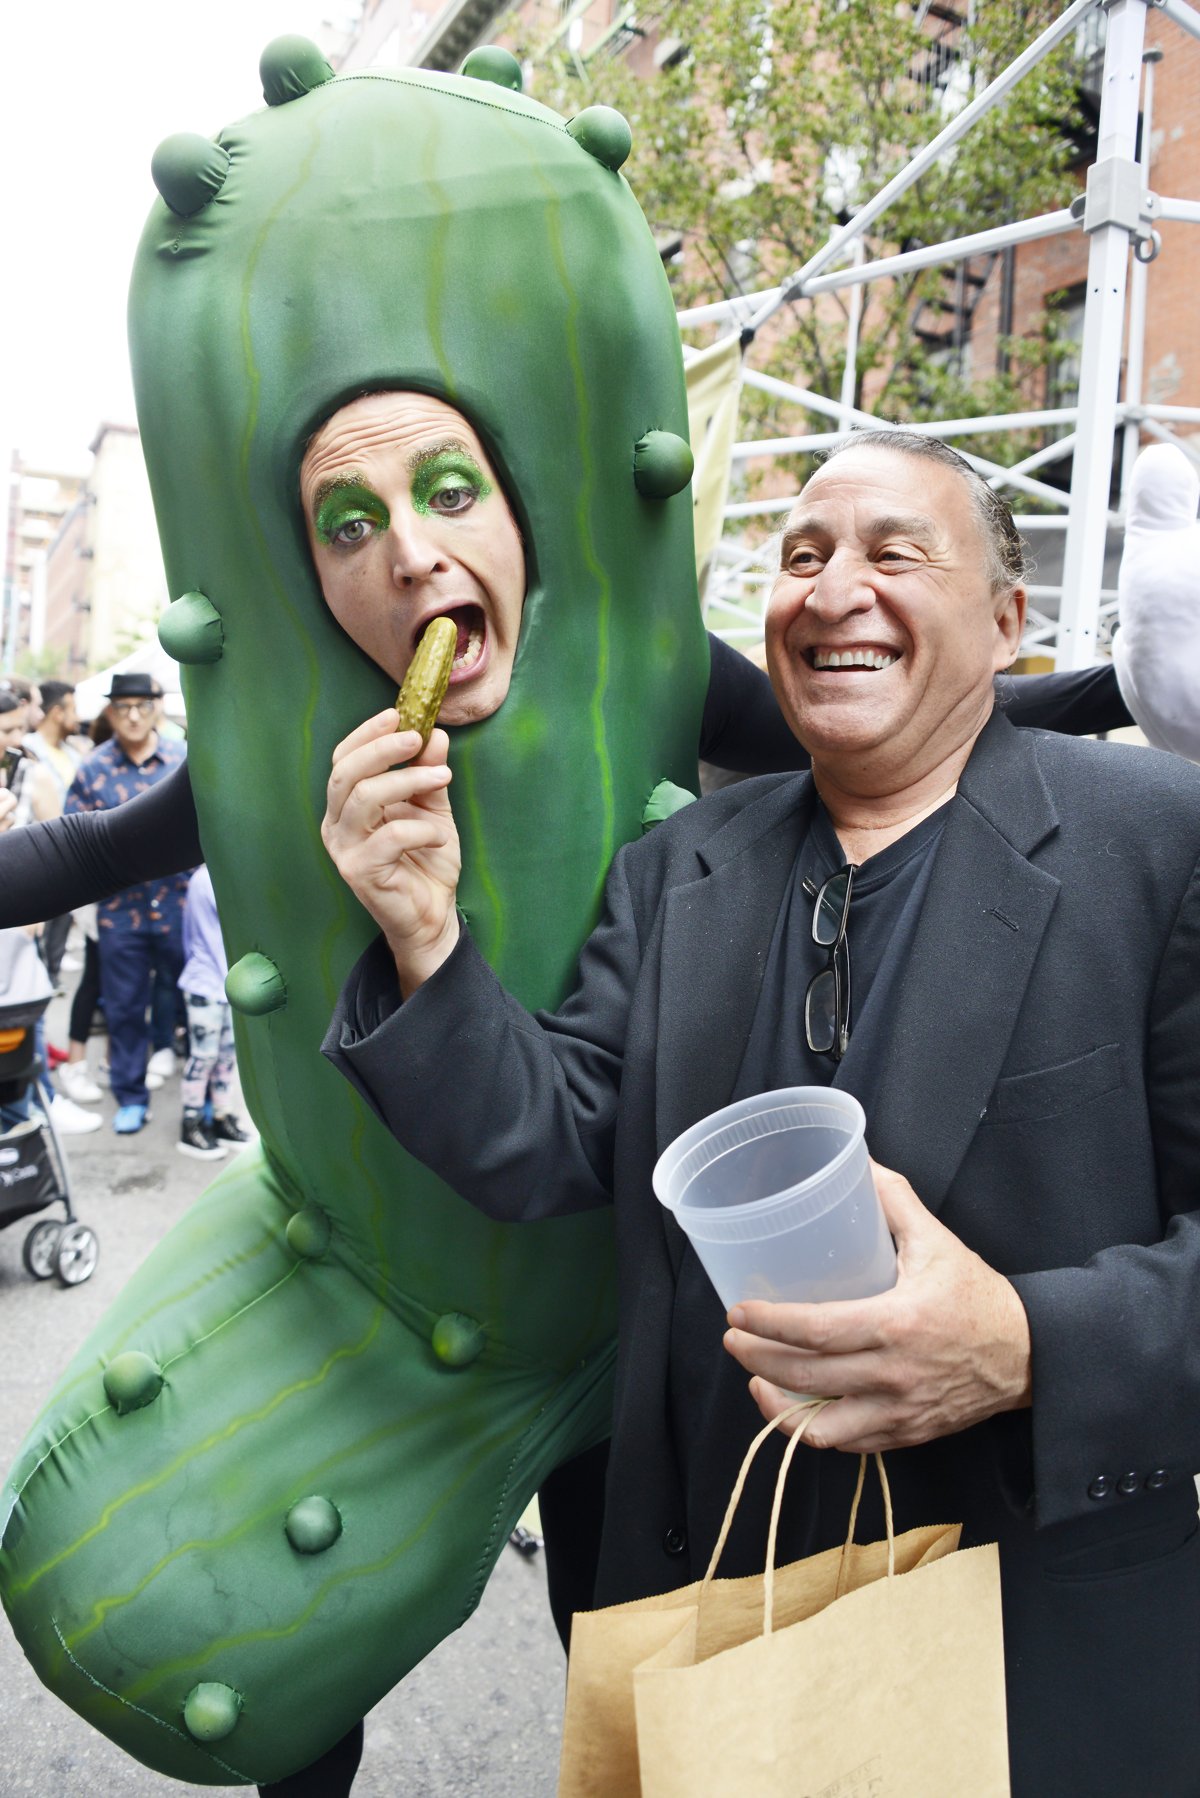 In a pickle on Orchard | amNewYork